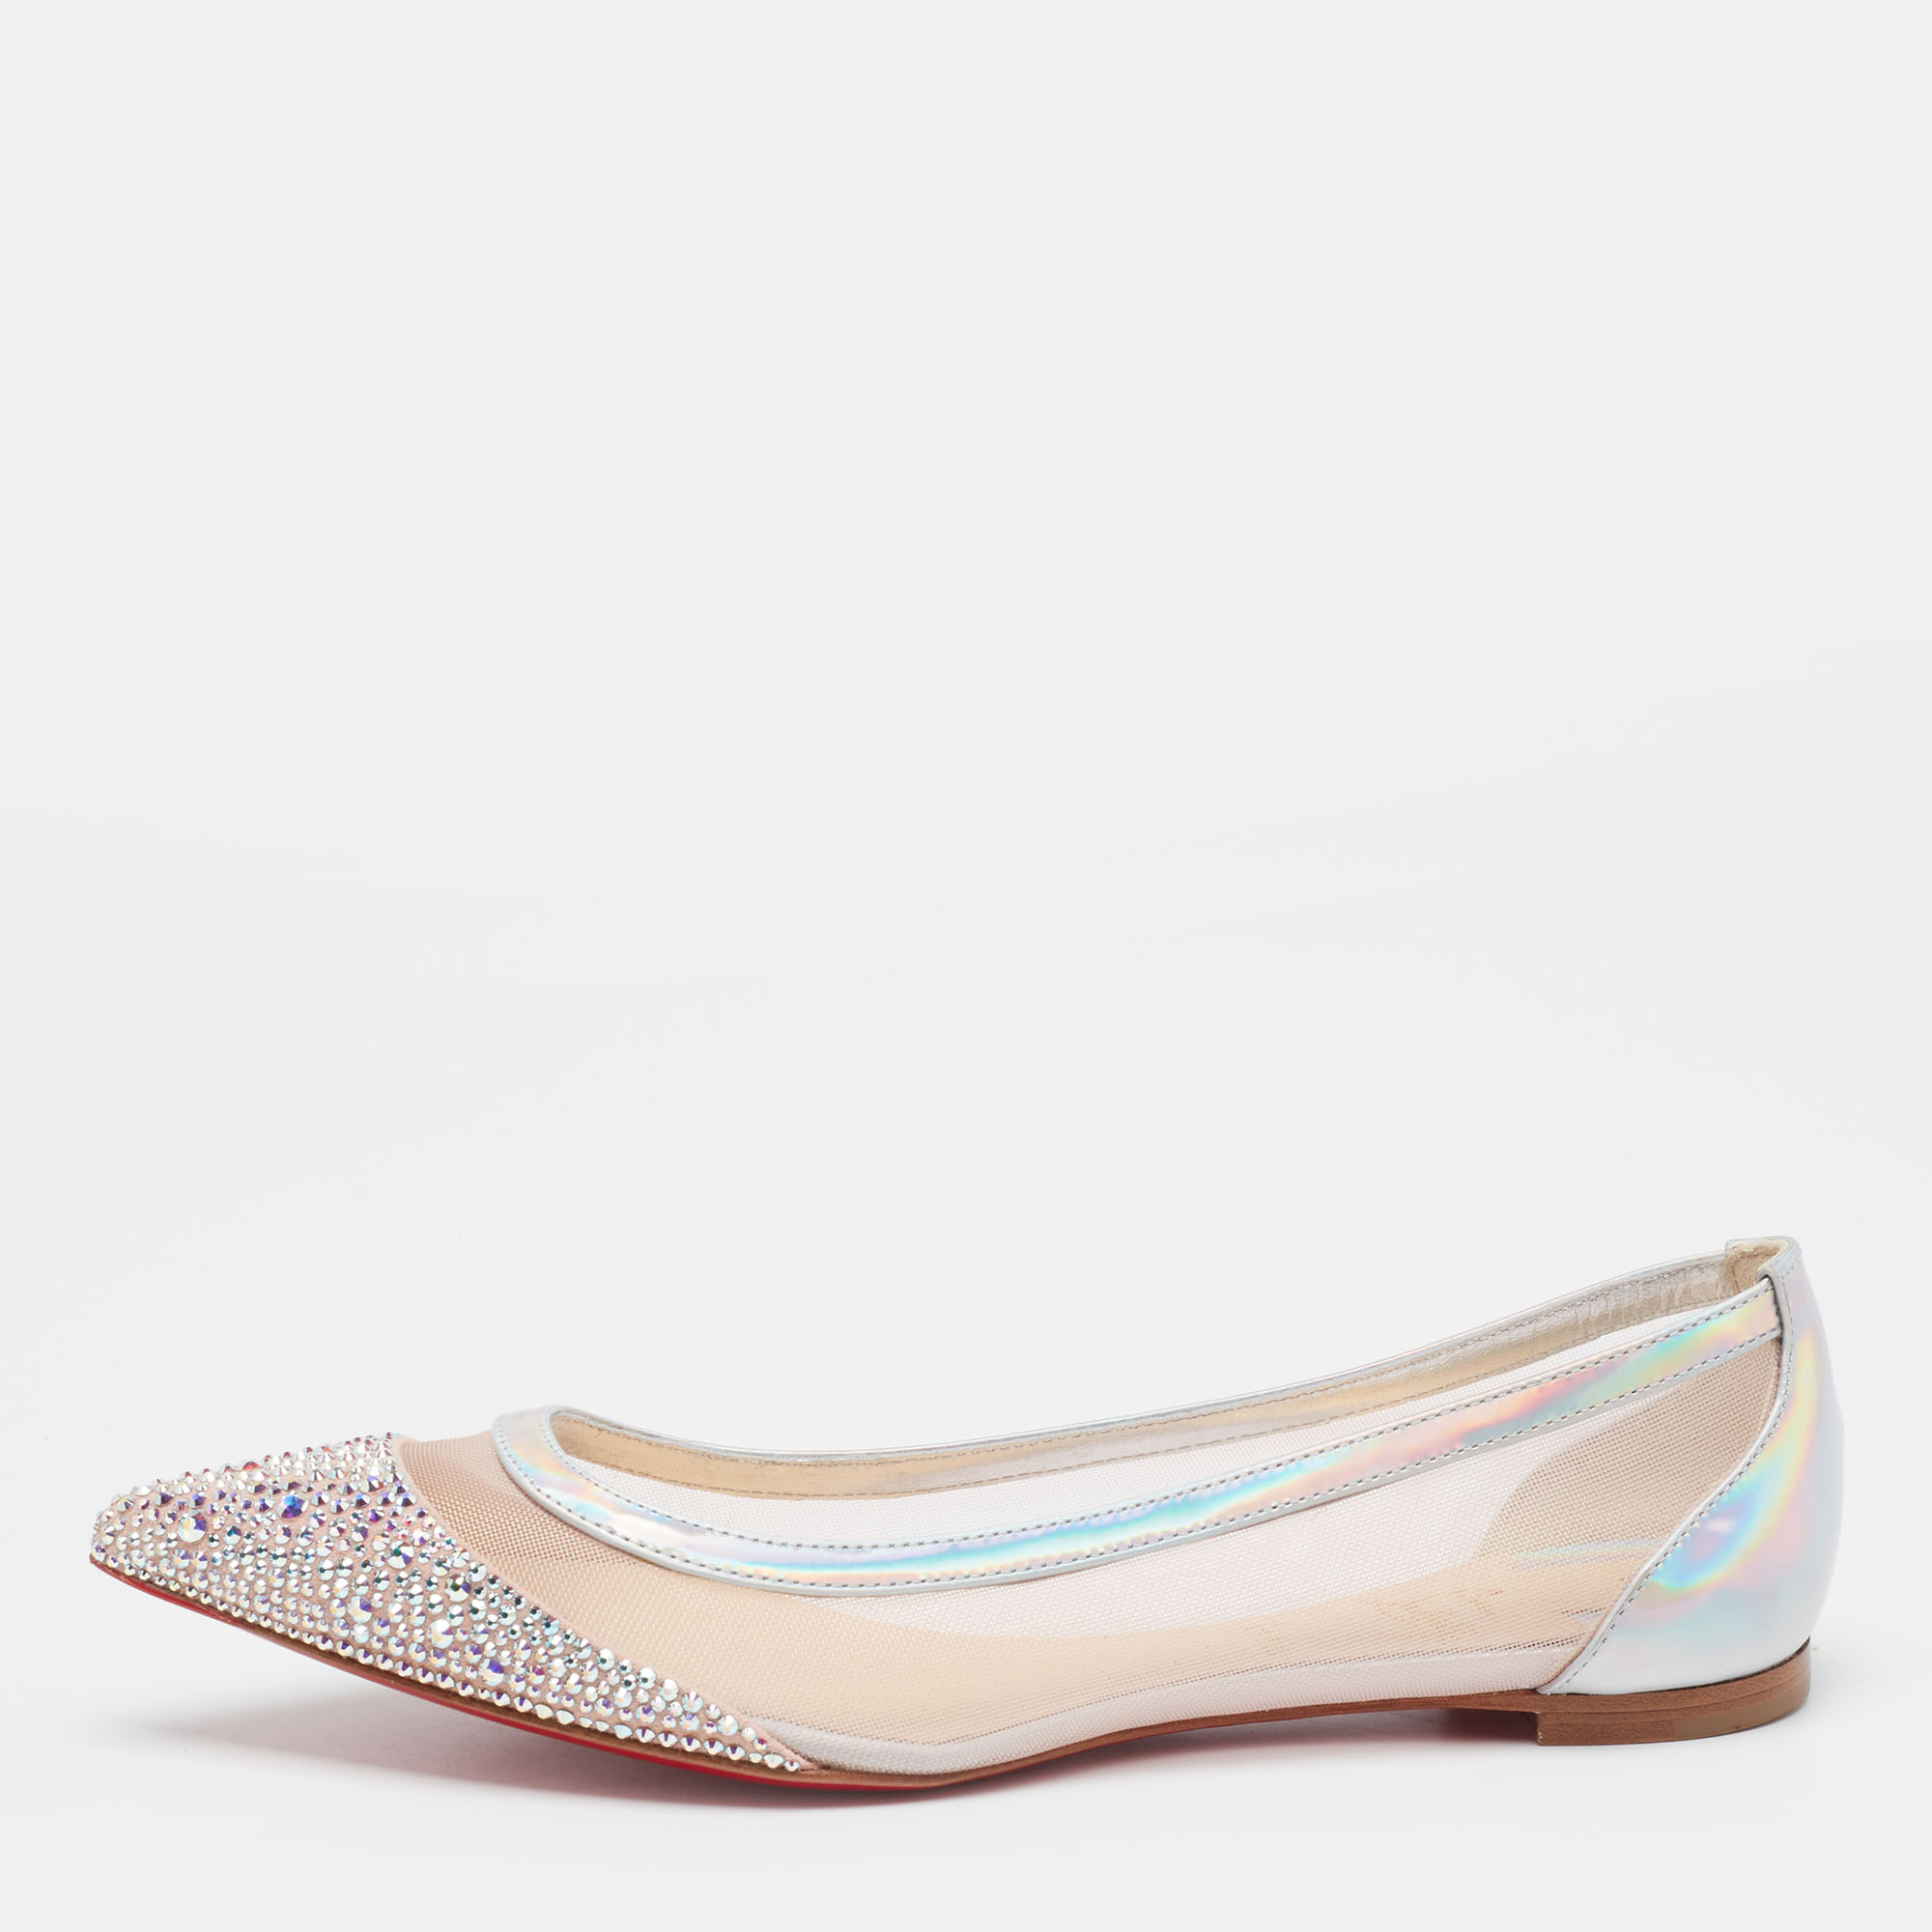 Pre-owned Christian Louboutin Light Pink Mesh Iridescent Leather And Suede Galativi Strass Ballet Flats Size 35.5